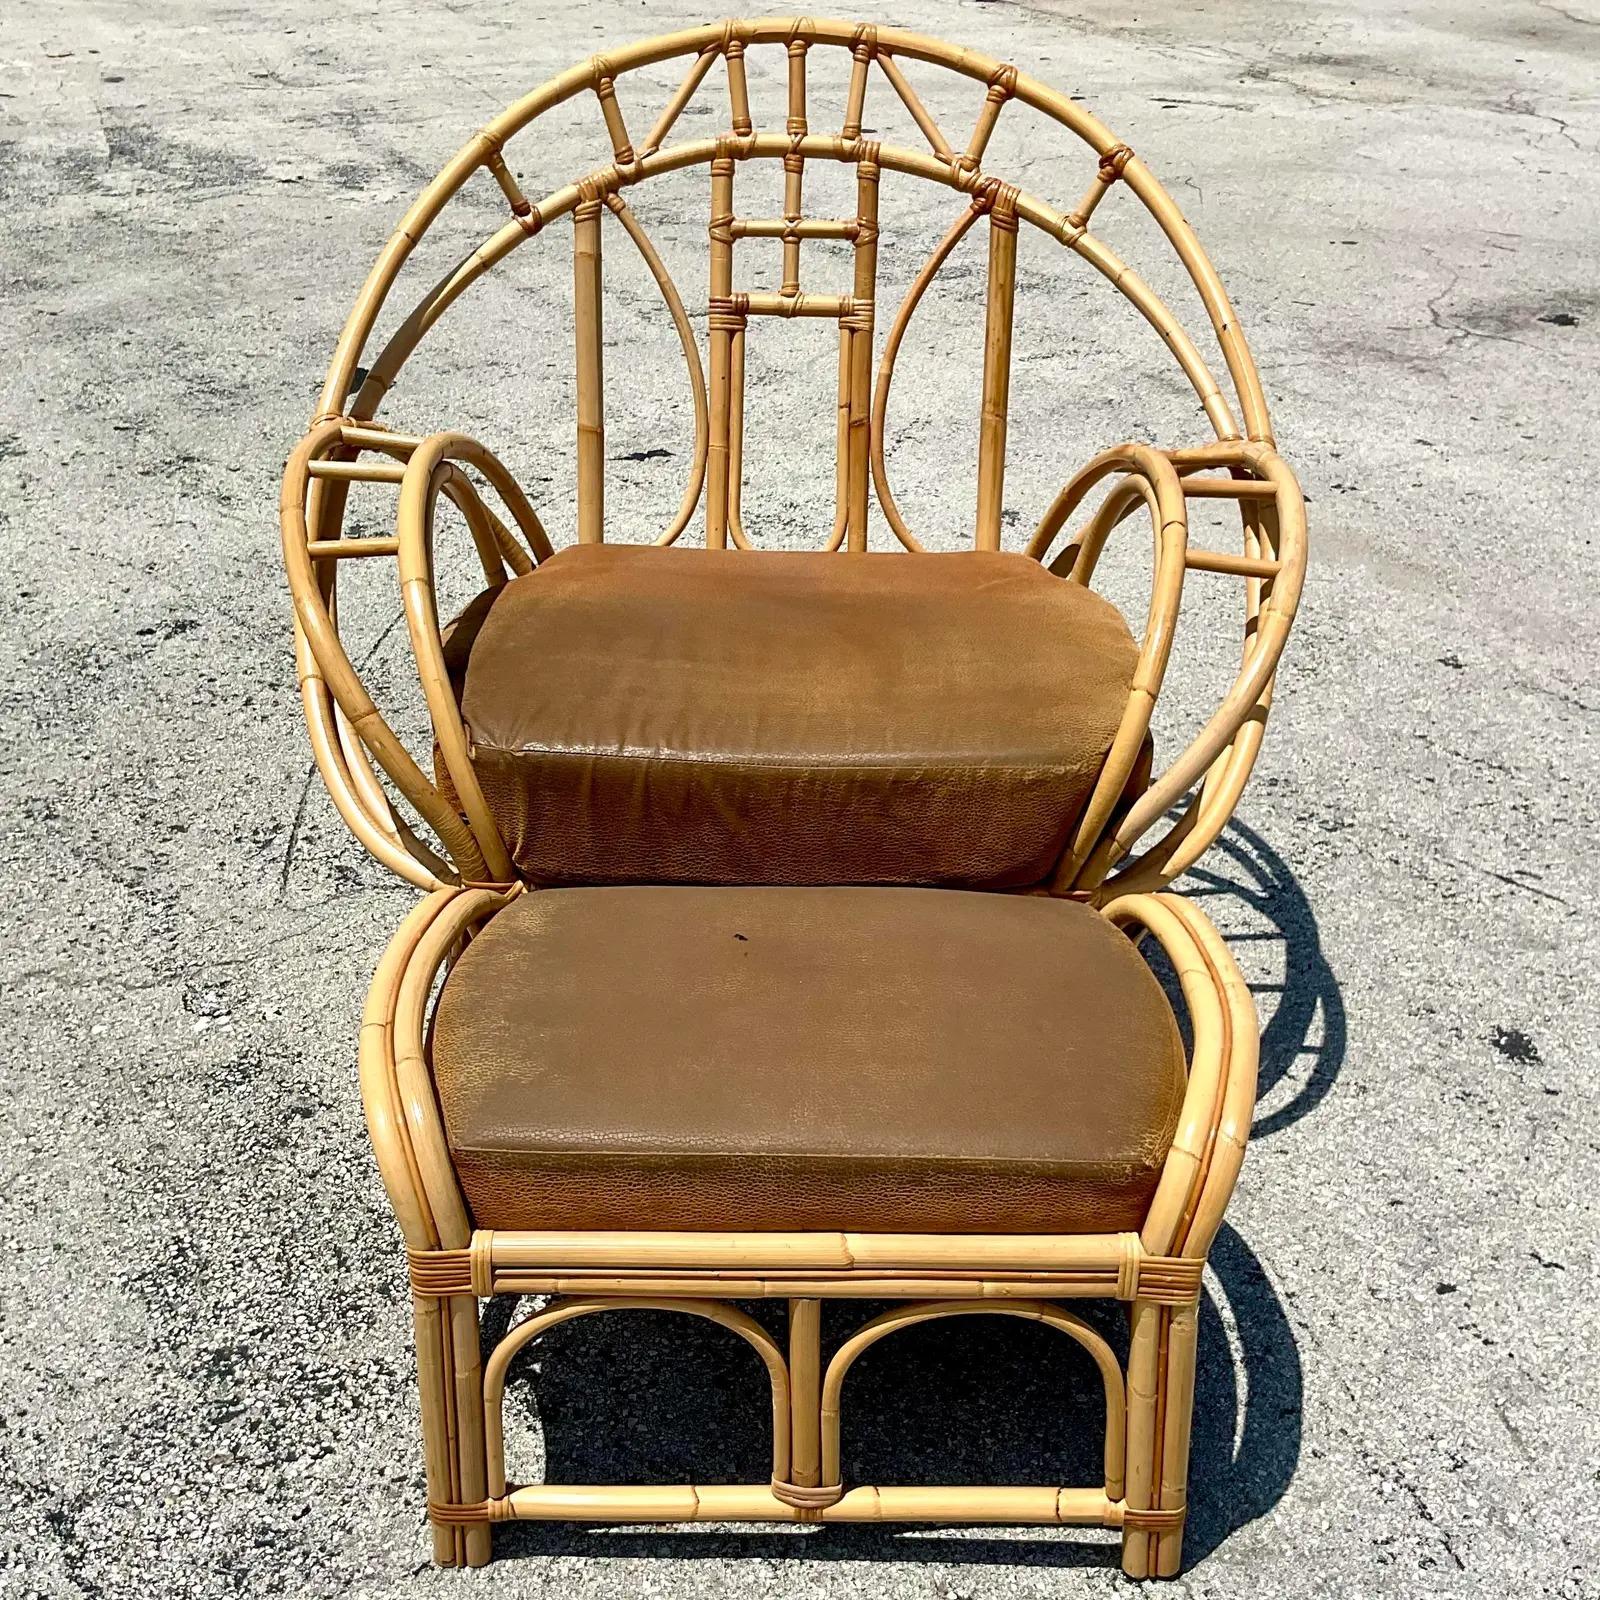 Fantastic vintage Coastal lounge chair and ottoman. Made in the manner of the iconic McGuire butterfly chair, but larger. Super roomy and comfortable. Upholstered in a faux Nubuck suede. Acquired from a Palm Beach estate.